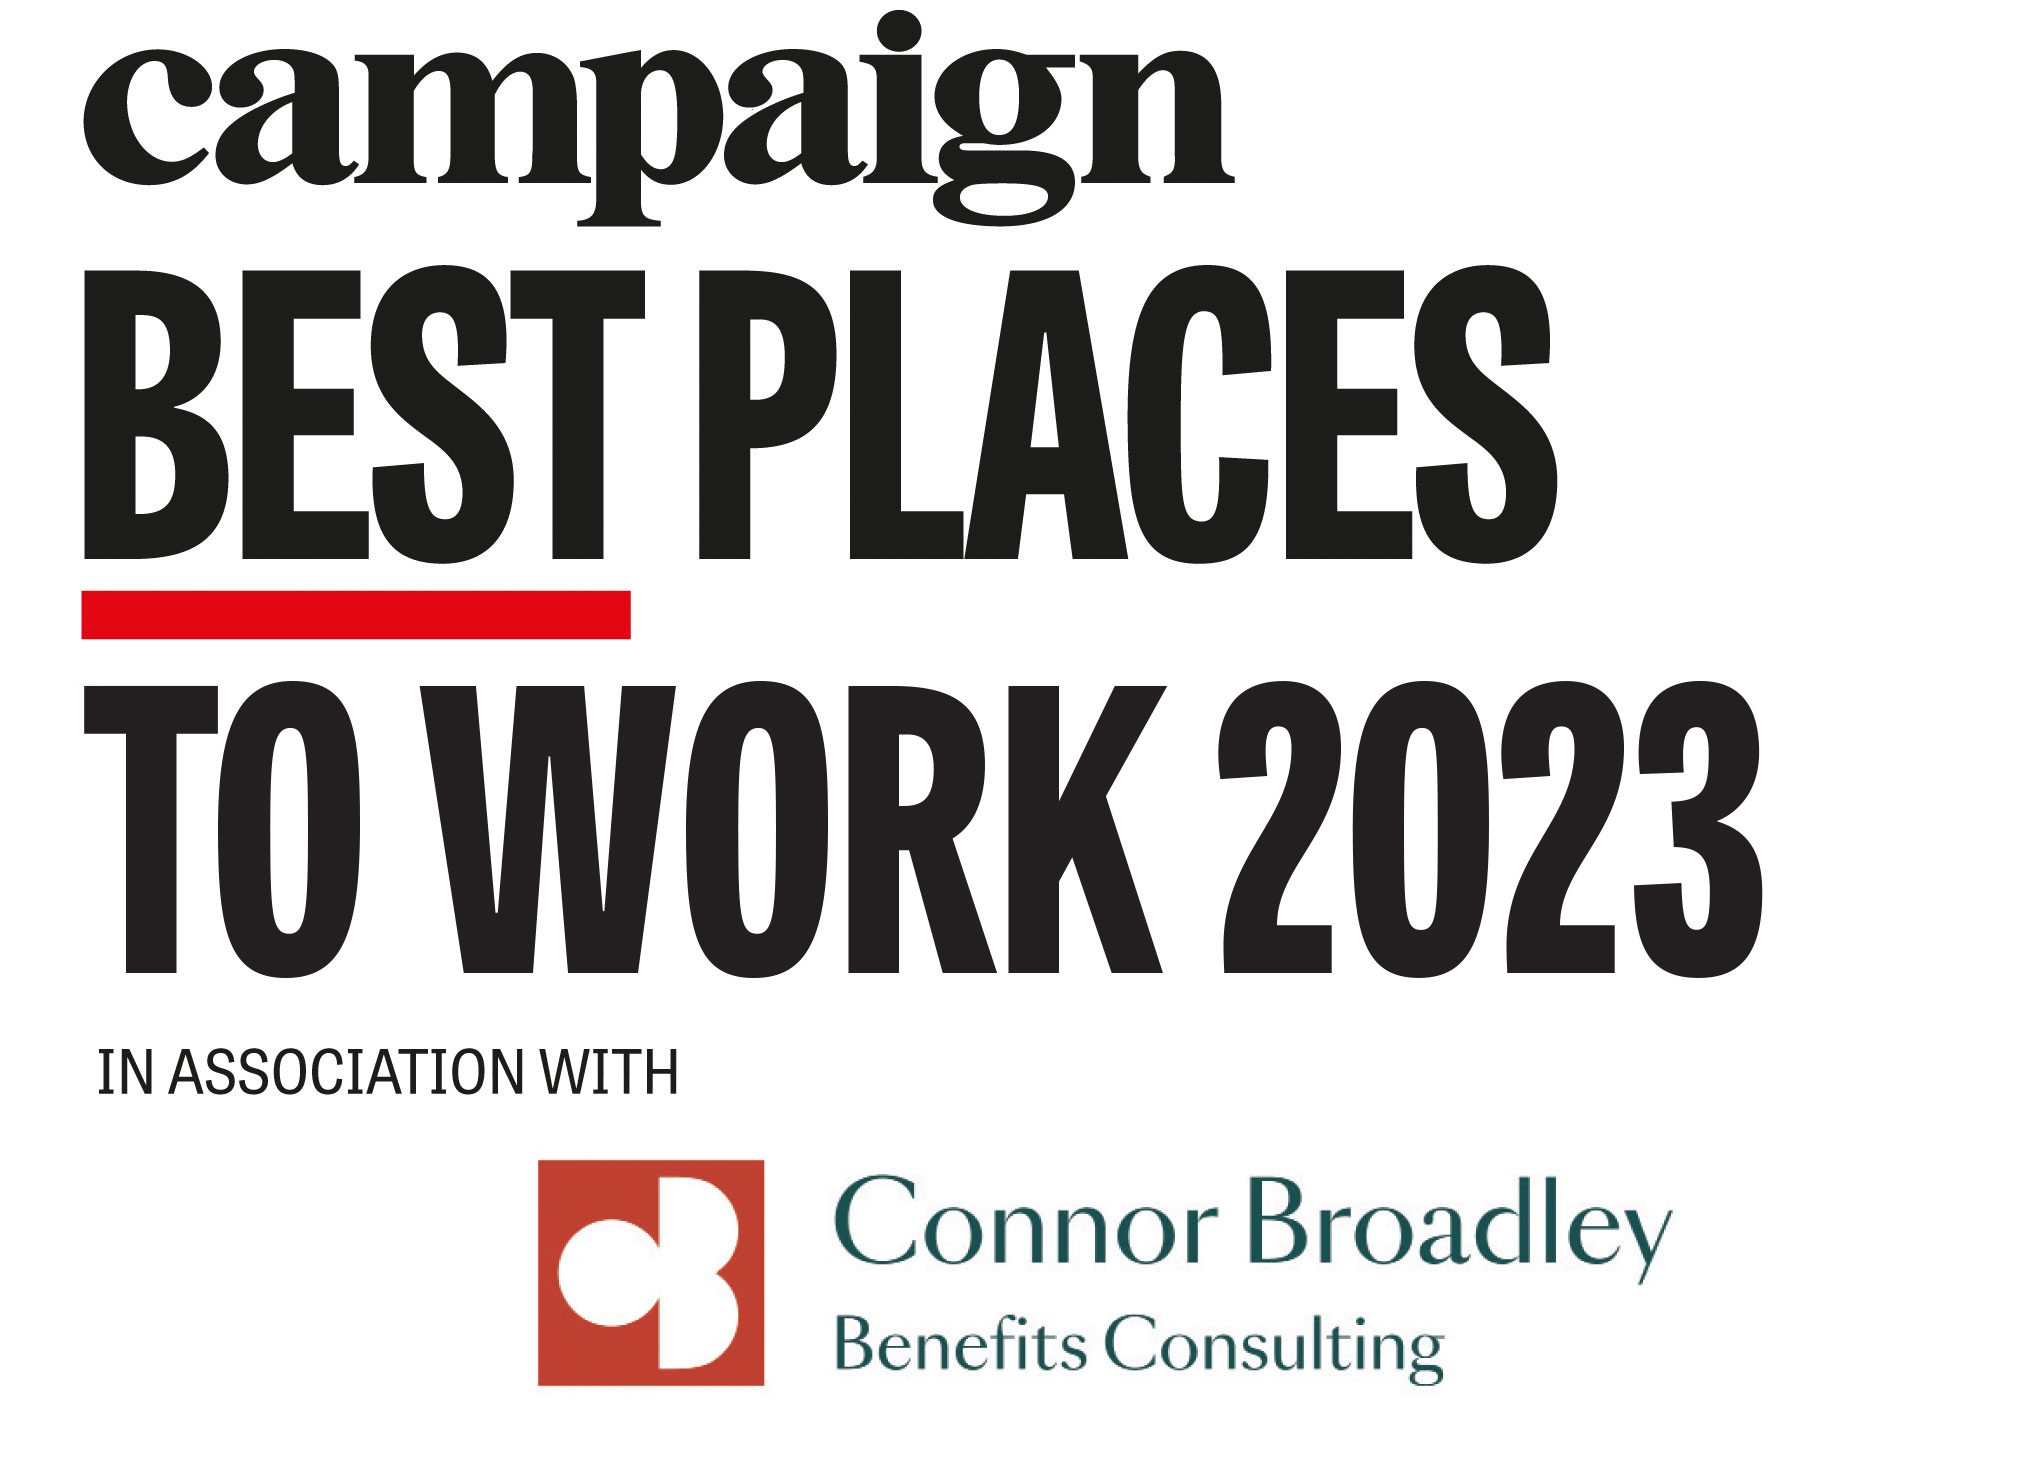 Campaign’s Best Places to Work Logo